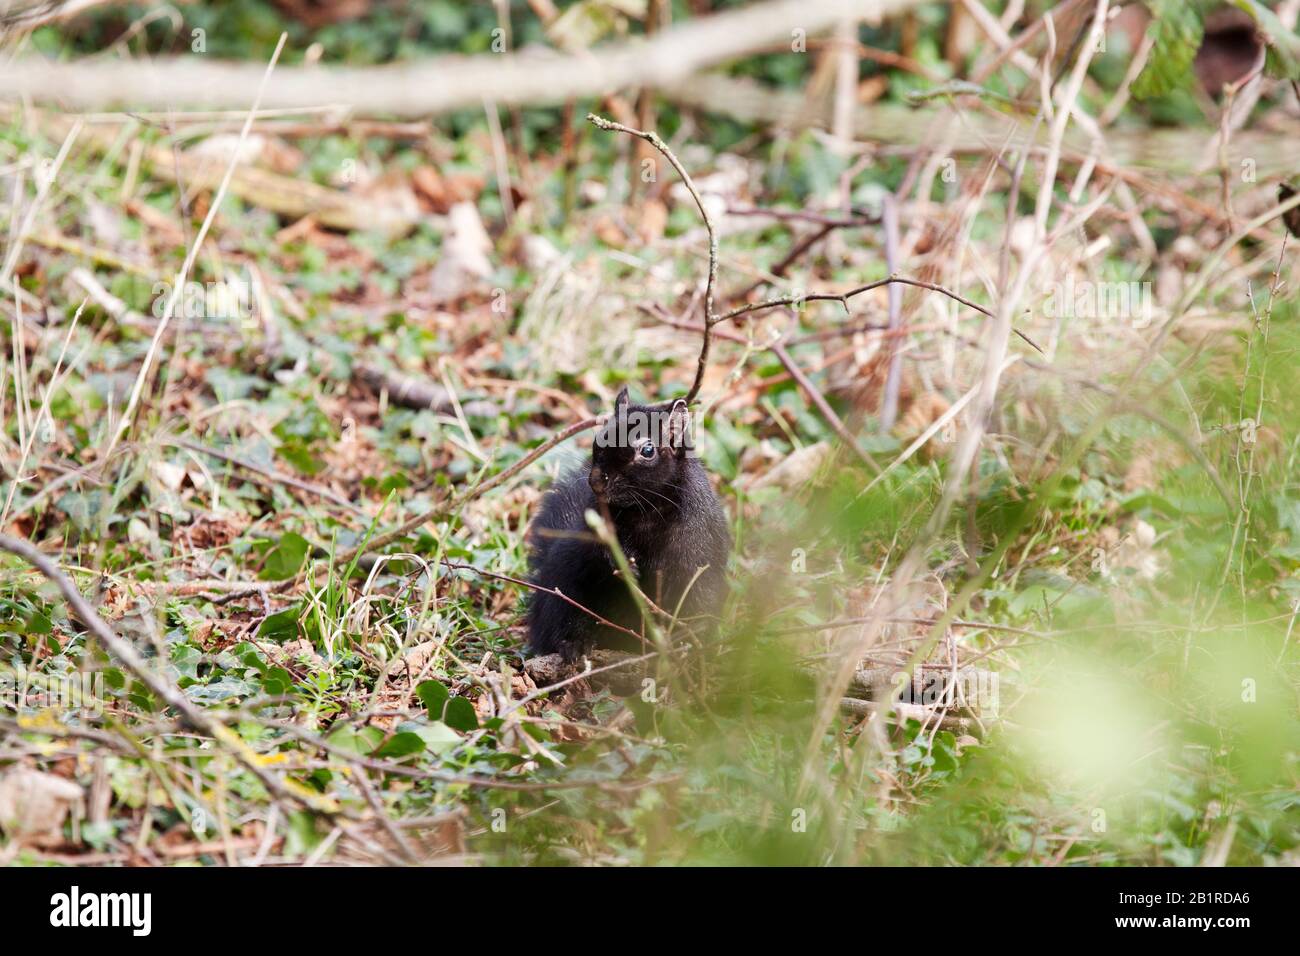 A shy black squirrel partially concealed by undergrowth, wild setting. Near Letchworth, where the black squirrel was first spotted in the UK in 1912. Stock Photo